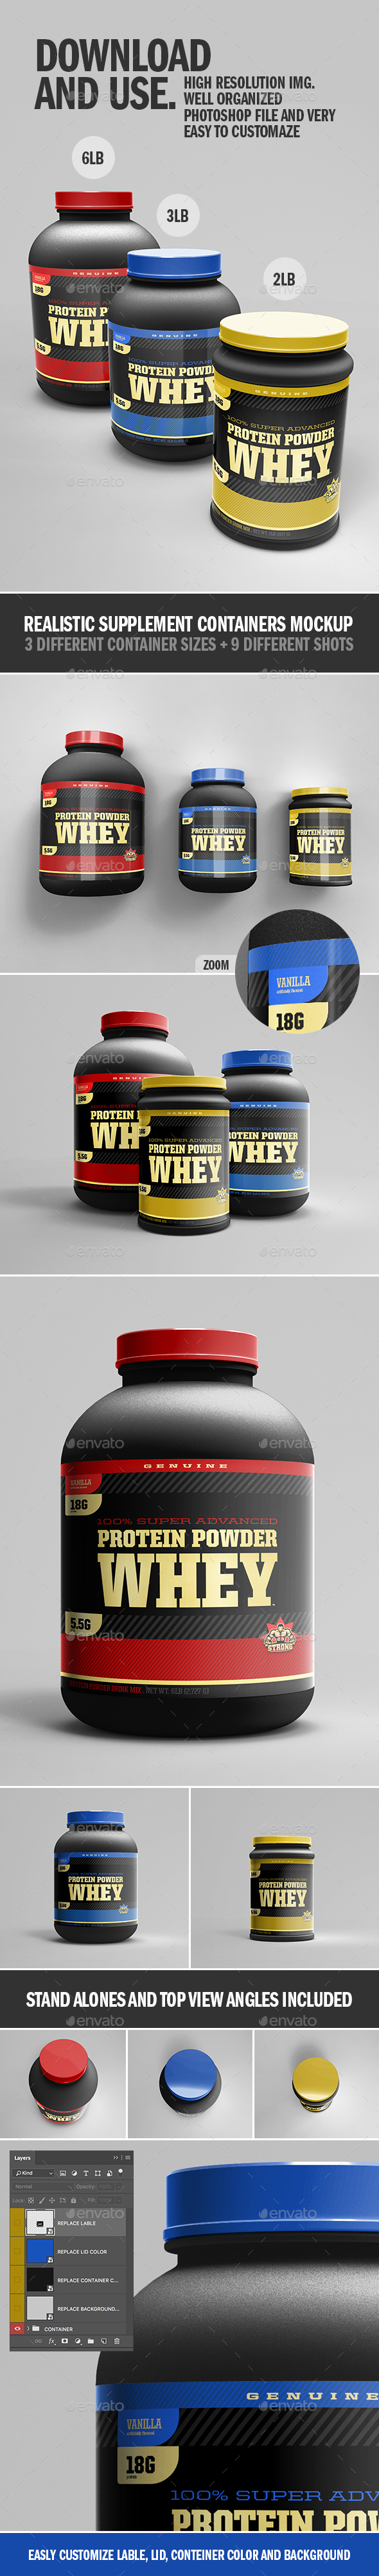 Download Realistic Supplement Containers Mockup By Danielkalves Graphicriver